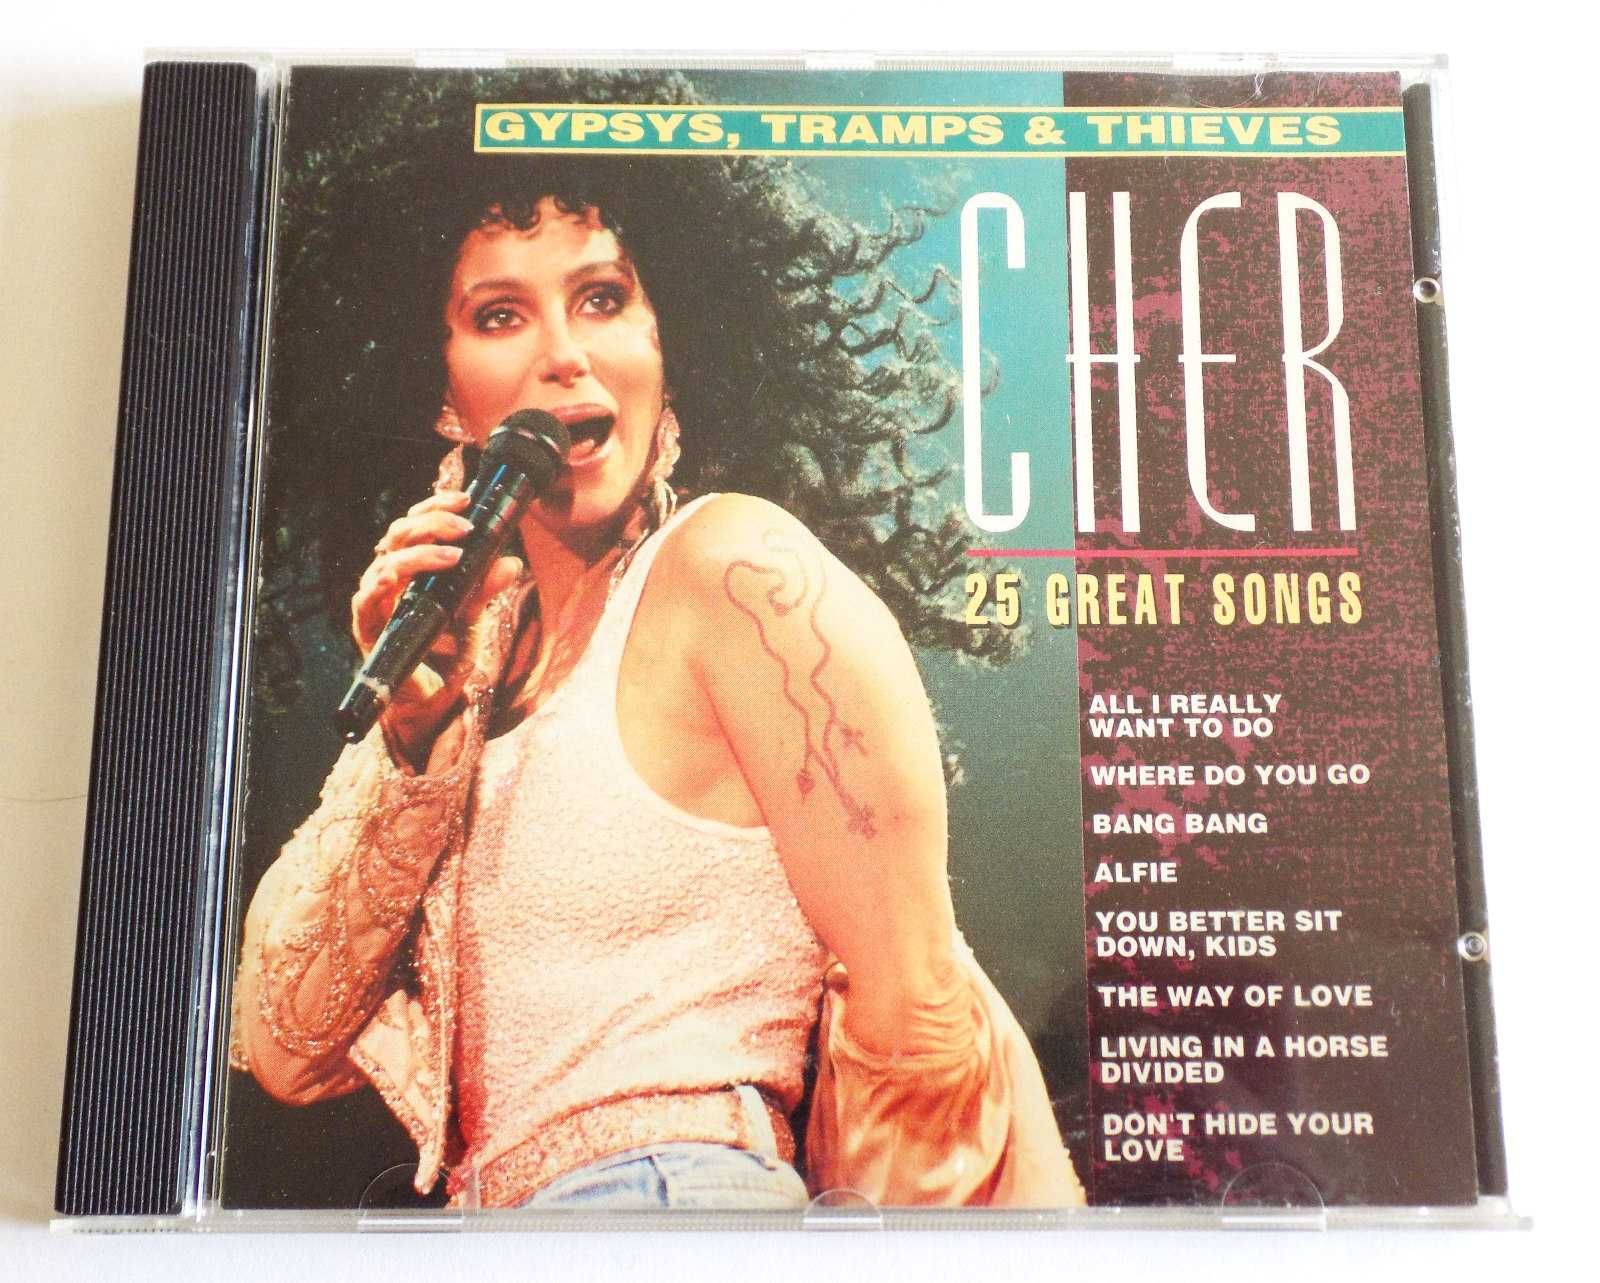 Cher - Gypsys, Tramps & Thieves 25 Great Songs - płyta CD